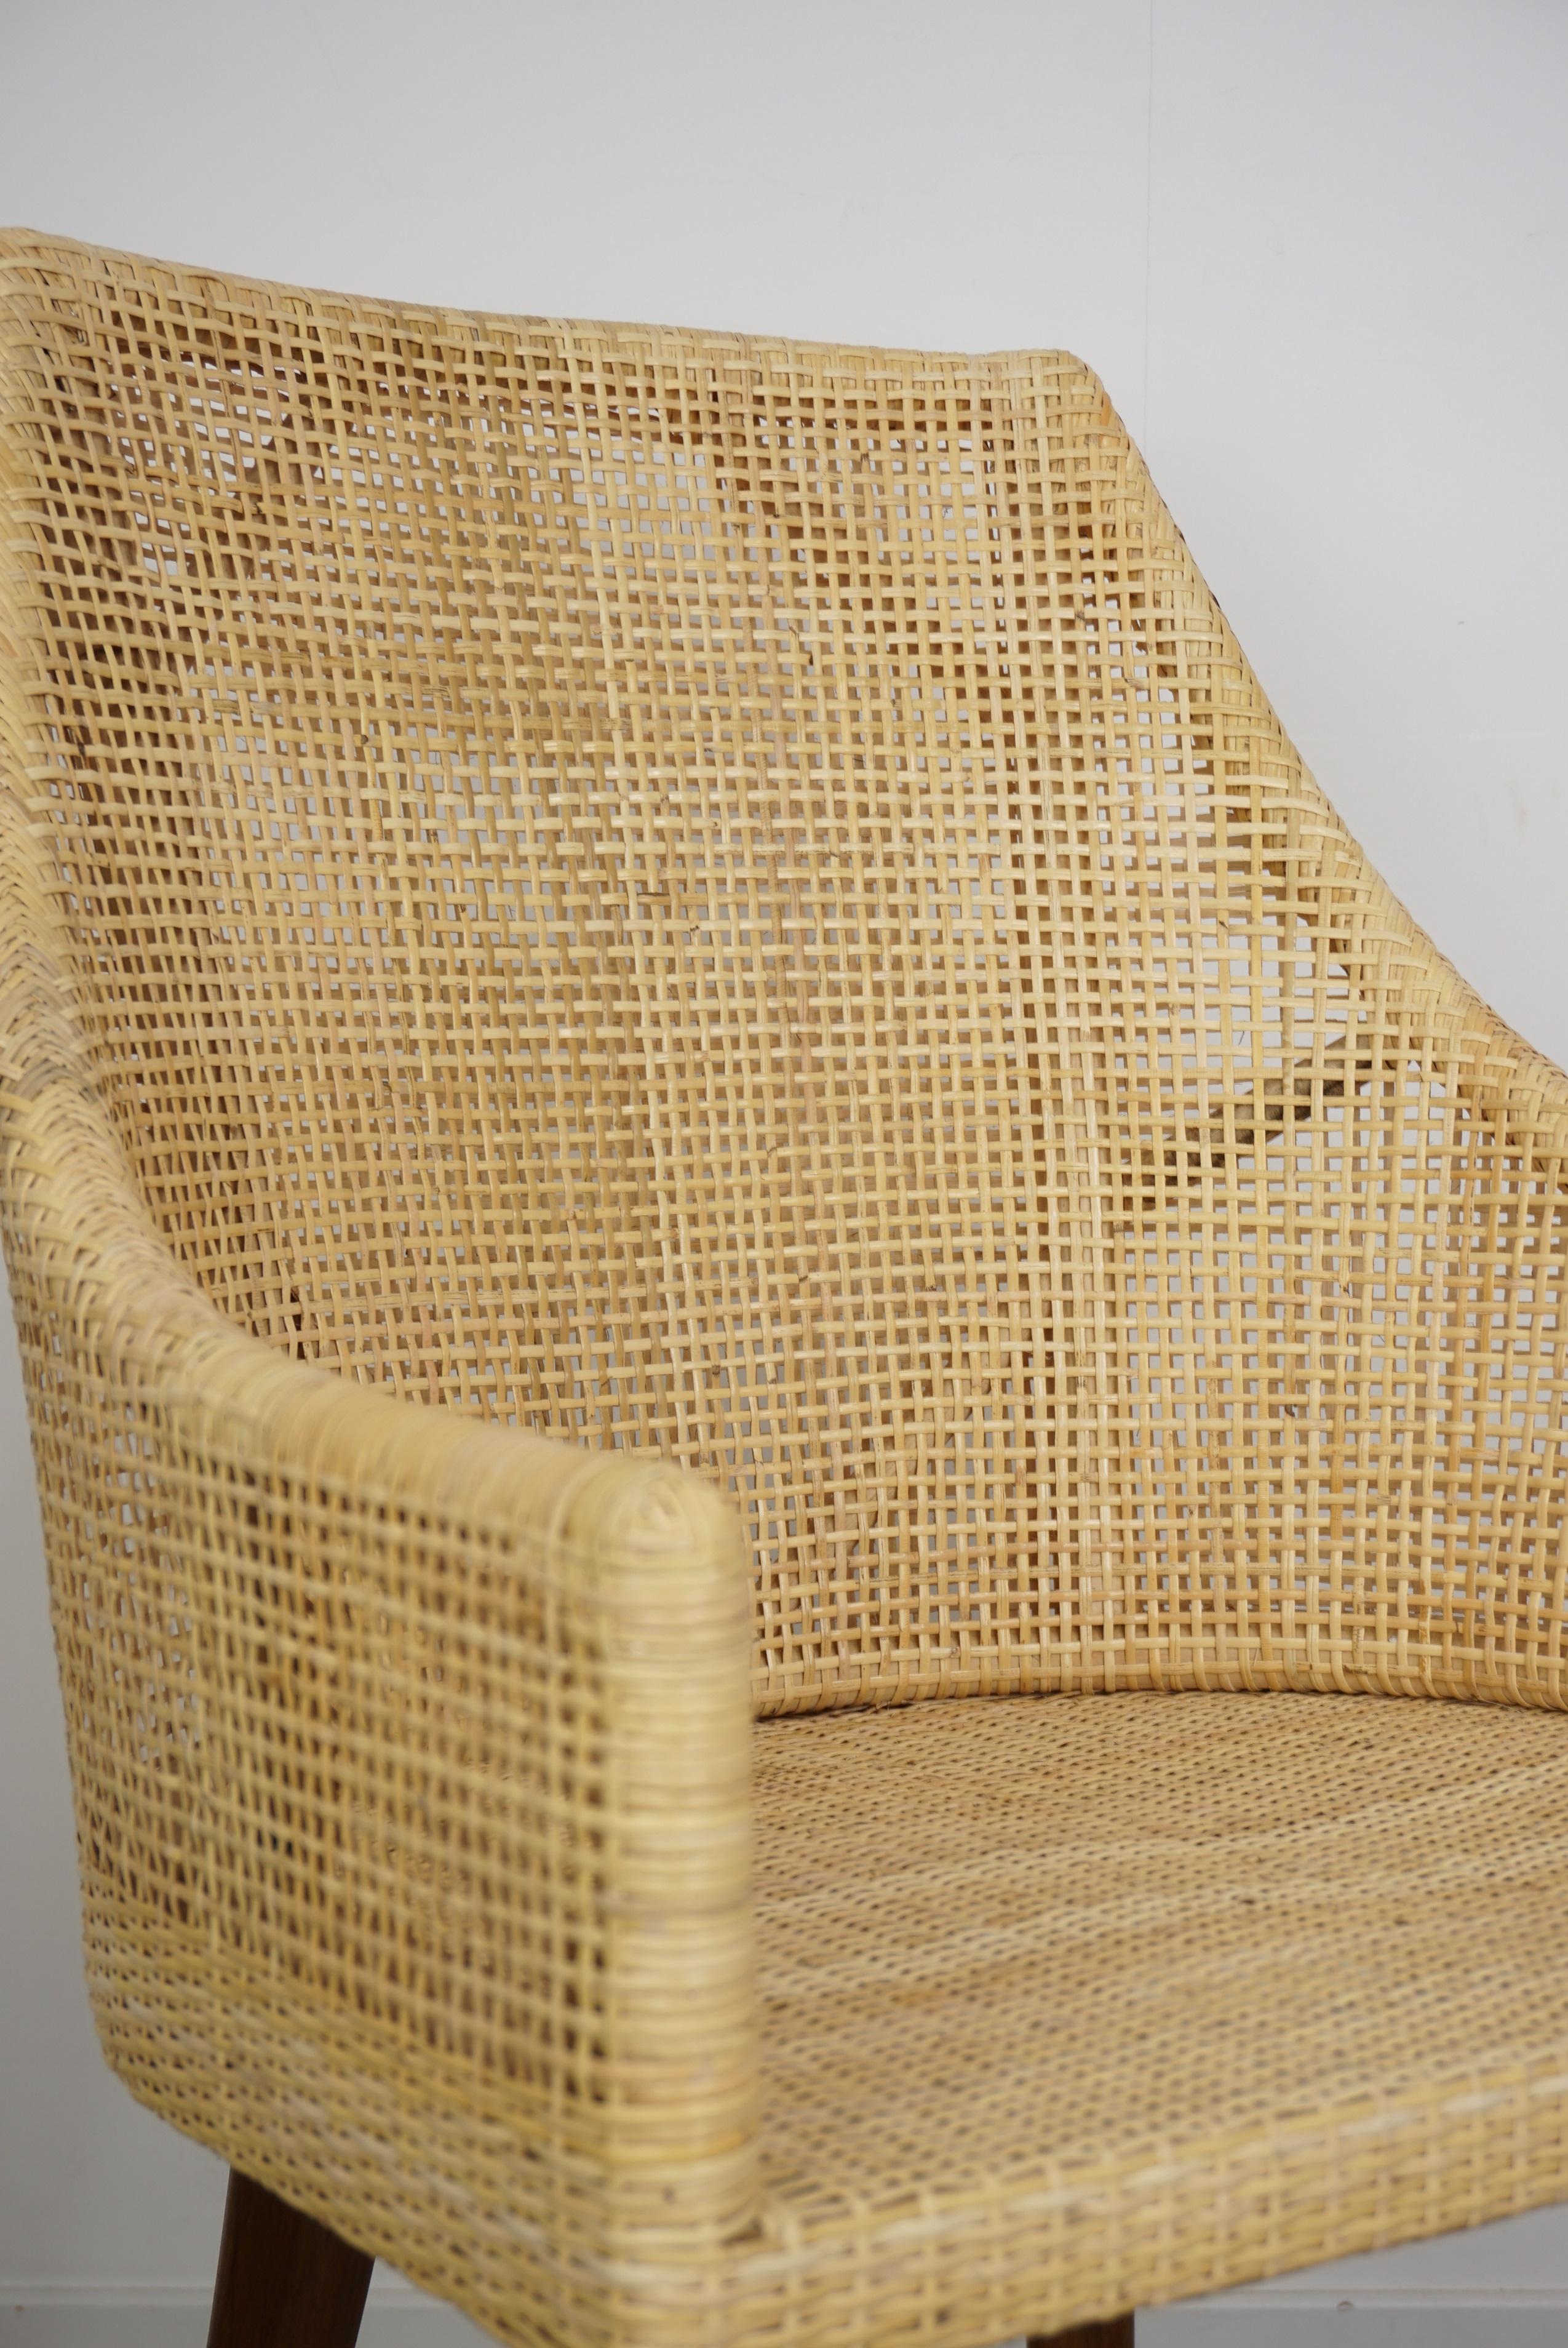 Handmade Braided Cane Rattan and Solid Wood Chair For Sale 8